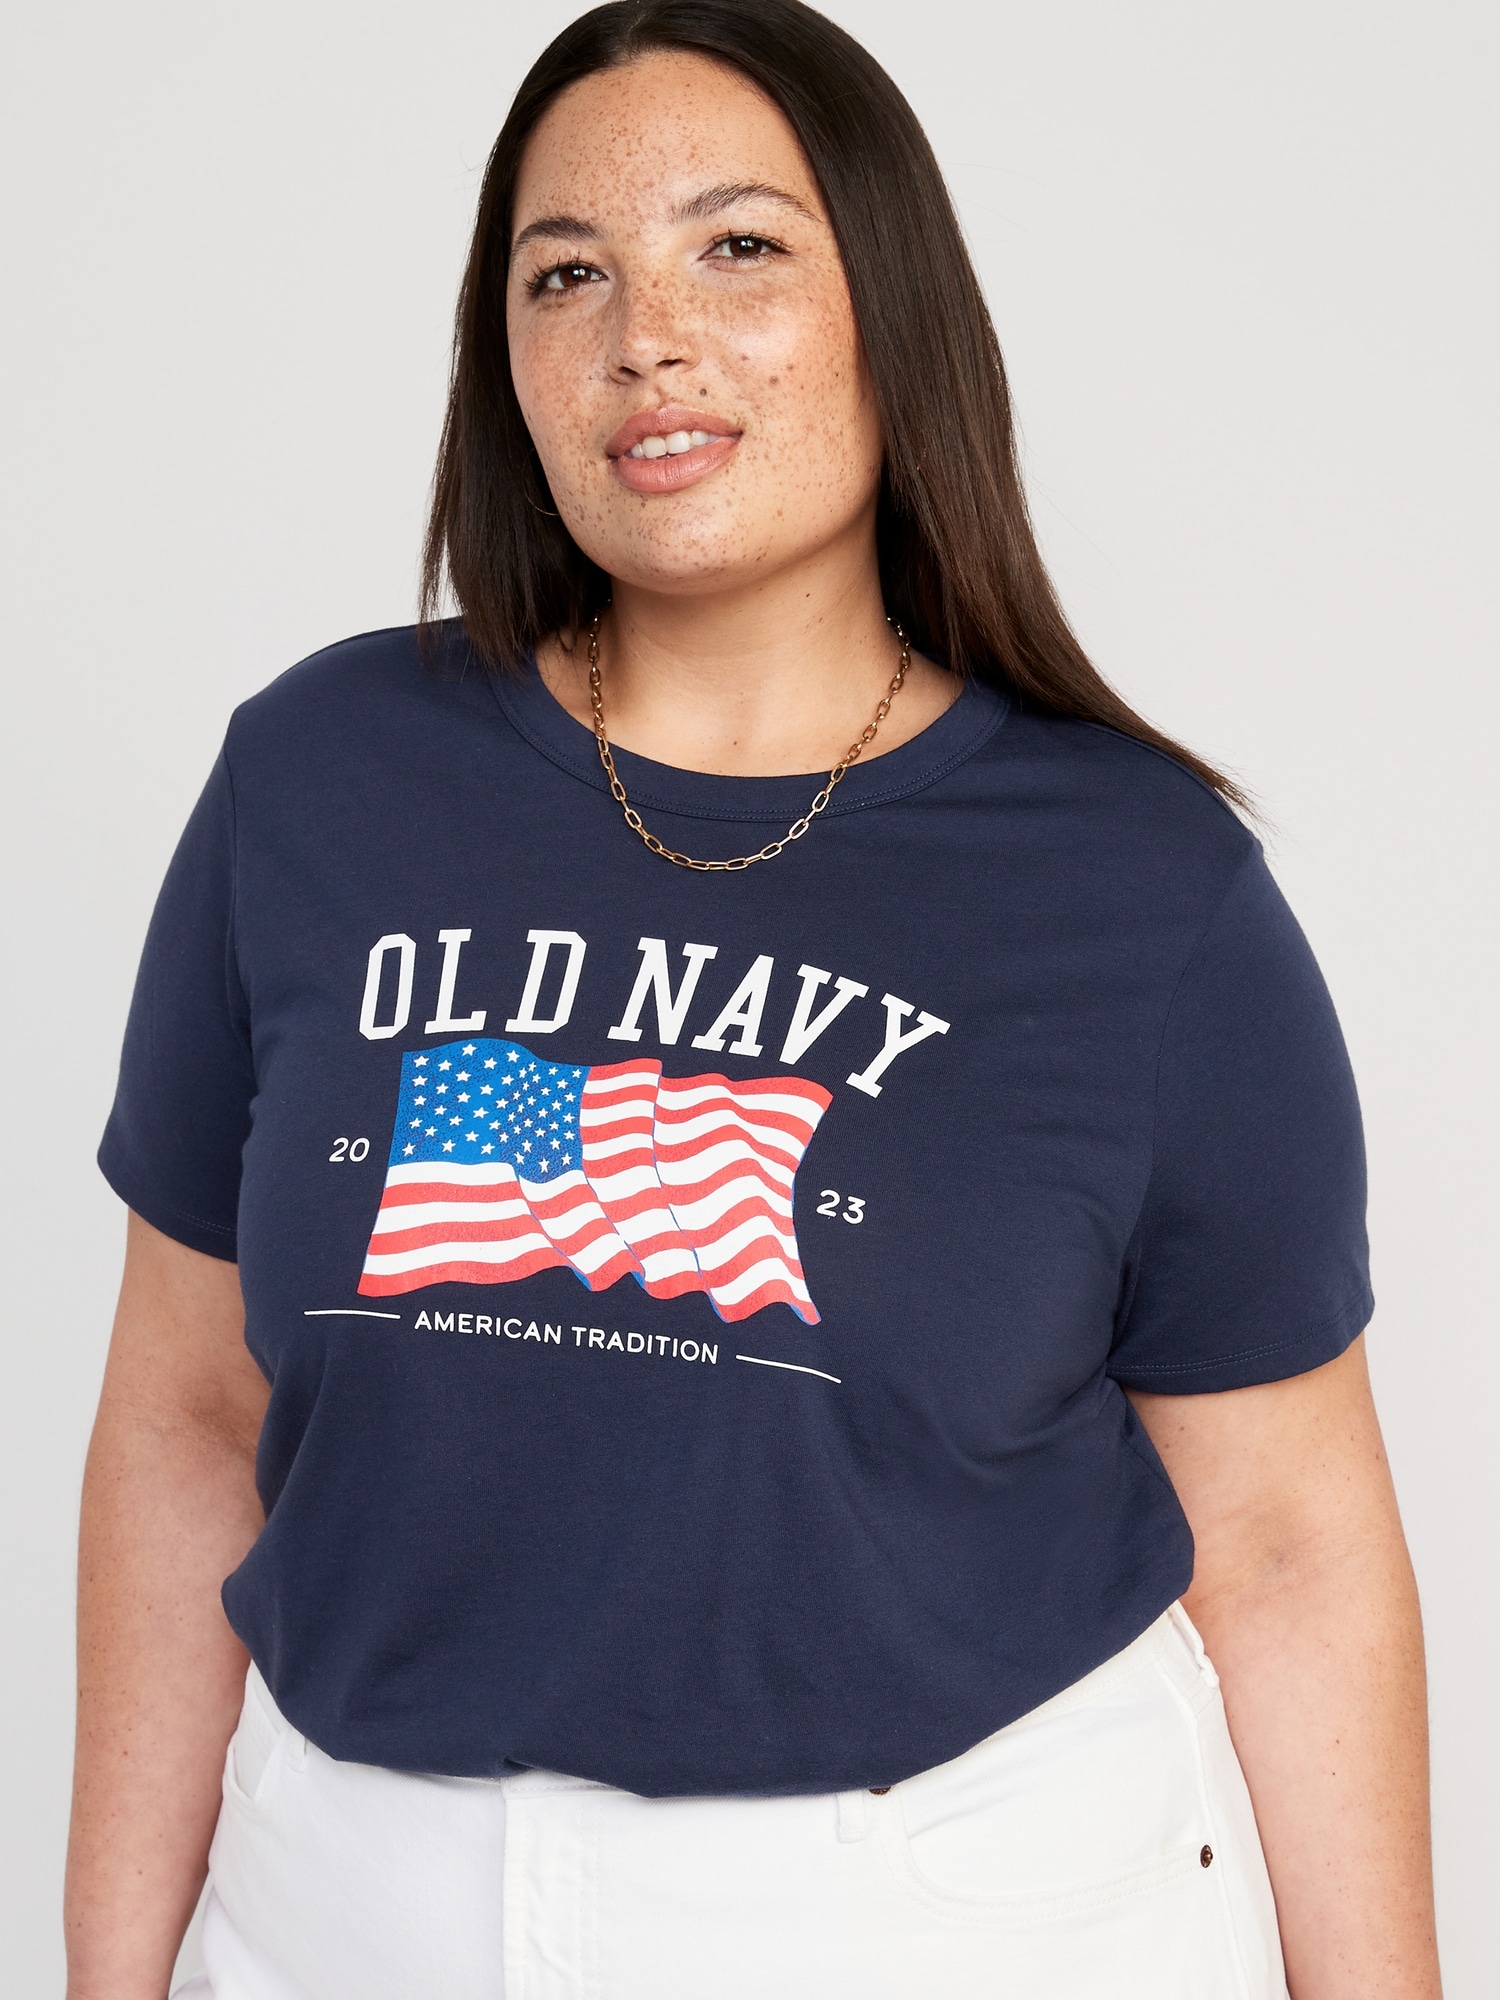 Shop the Artist-Made Flag Tees From Old Navy